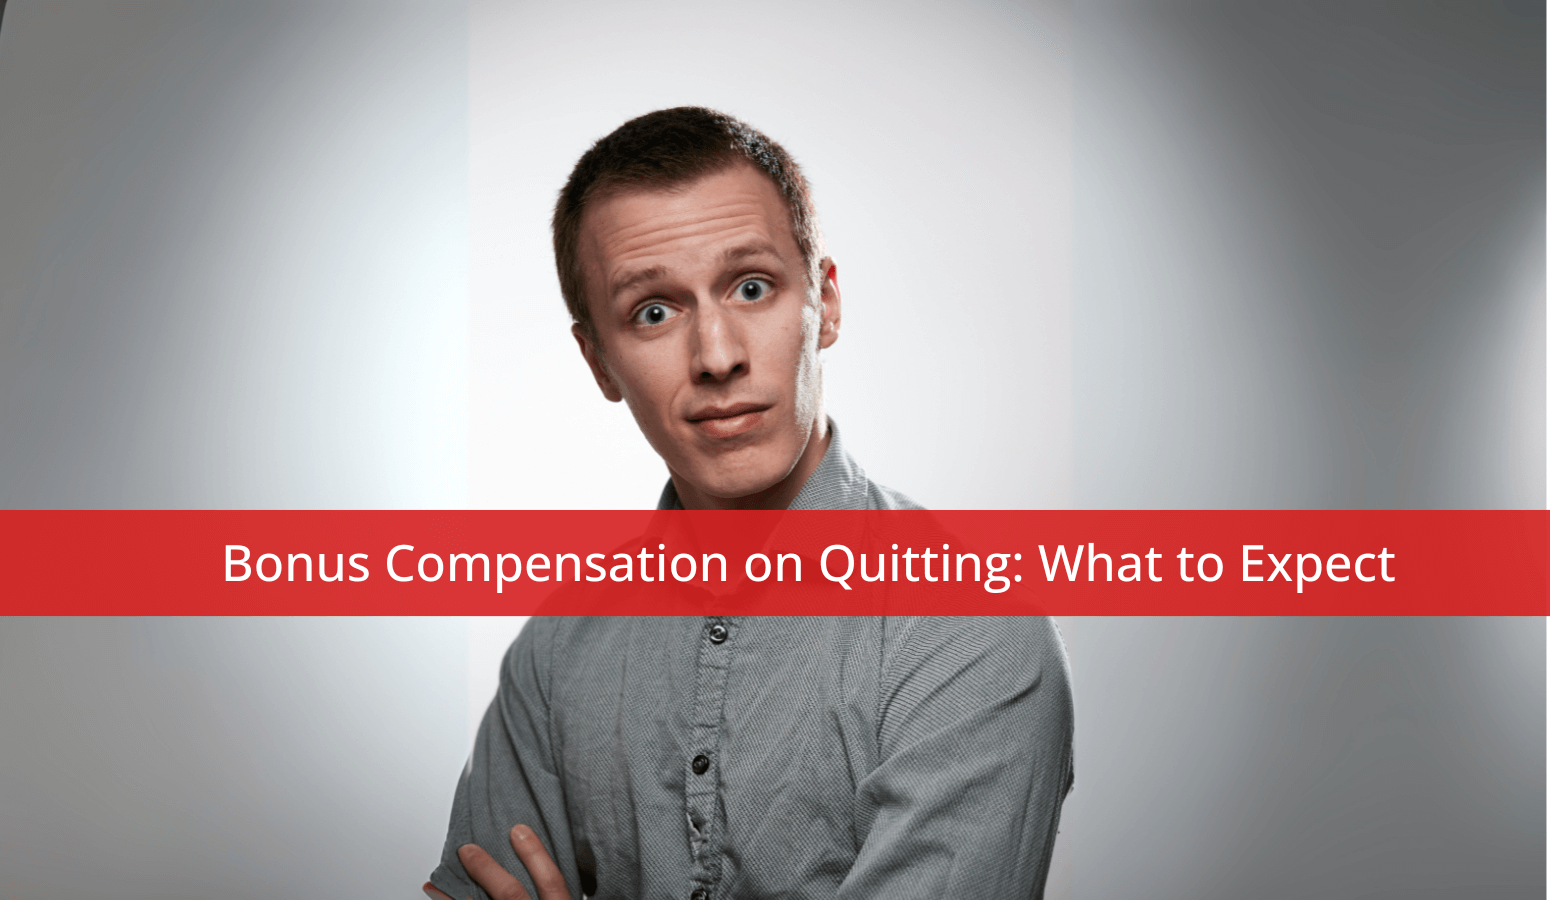 Featured image for “Bonus Compensation on Quitting: What to Expect”